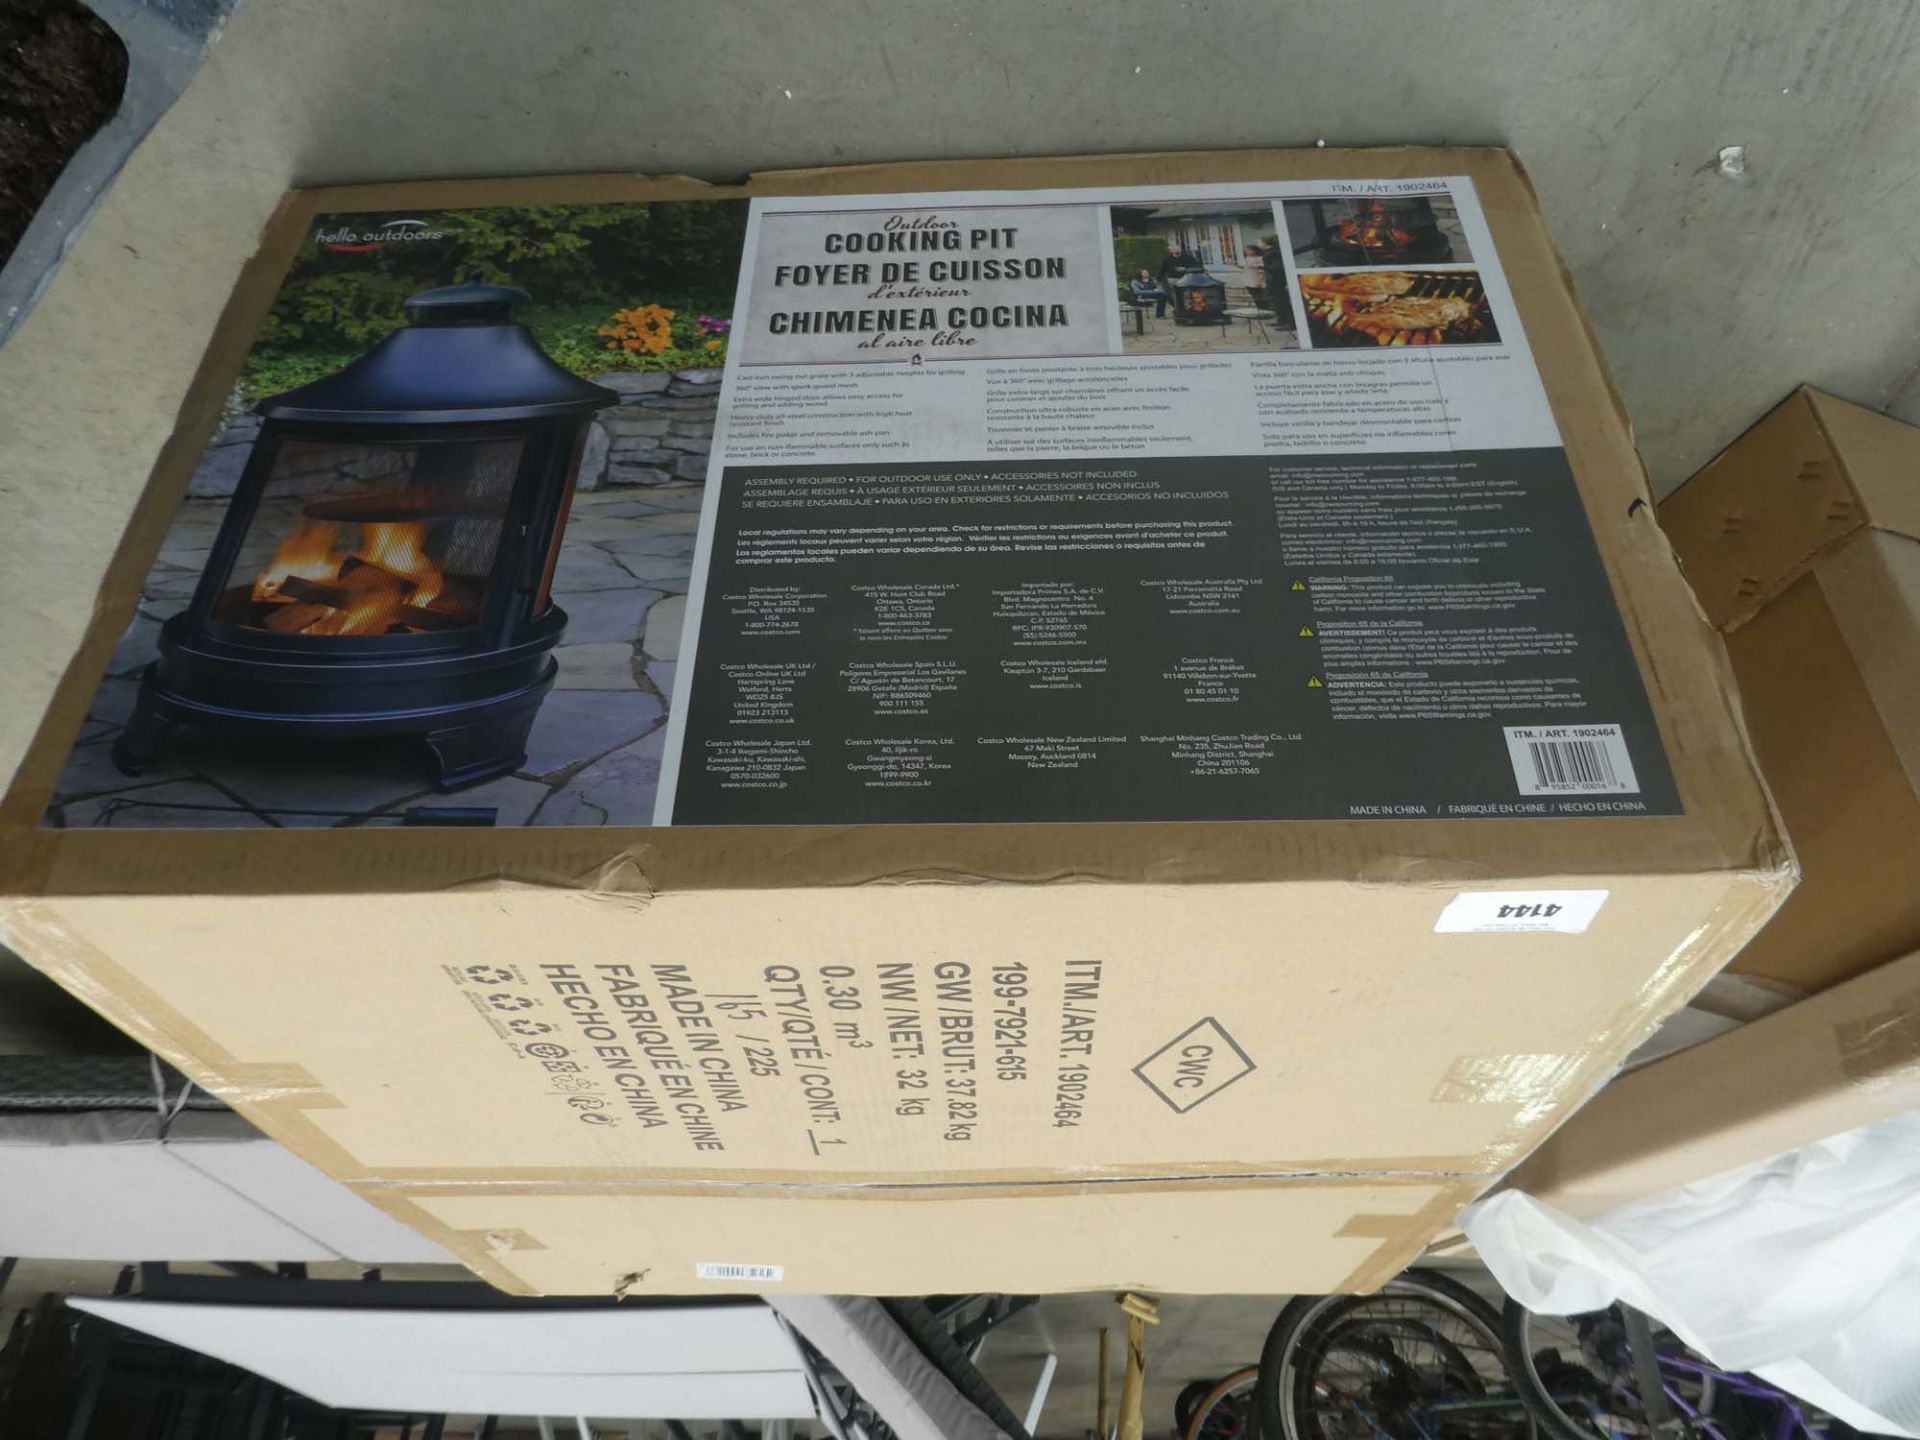 Boxed firepit/cooking pit